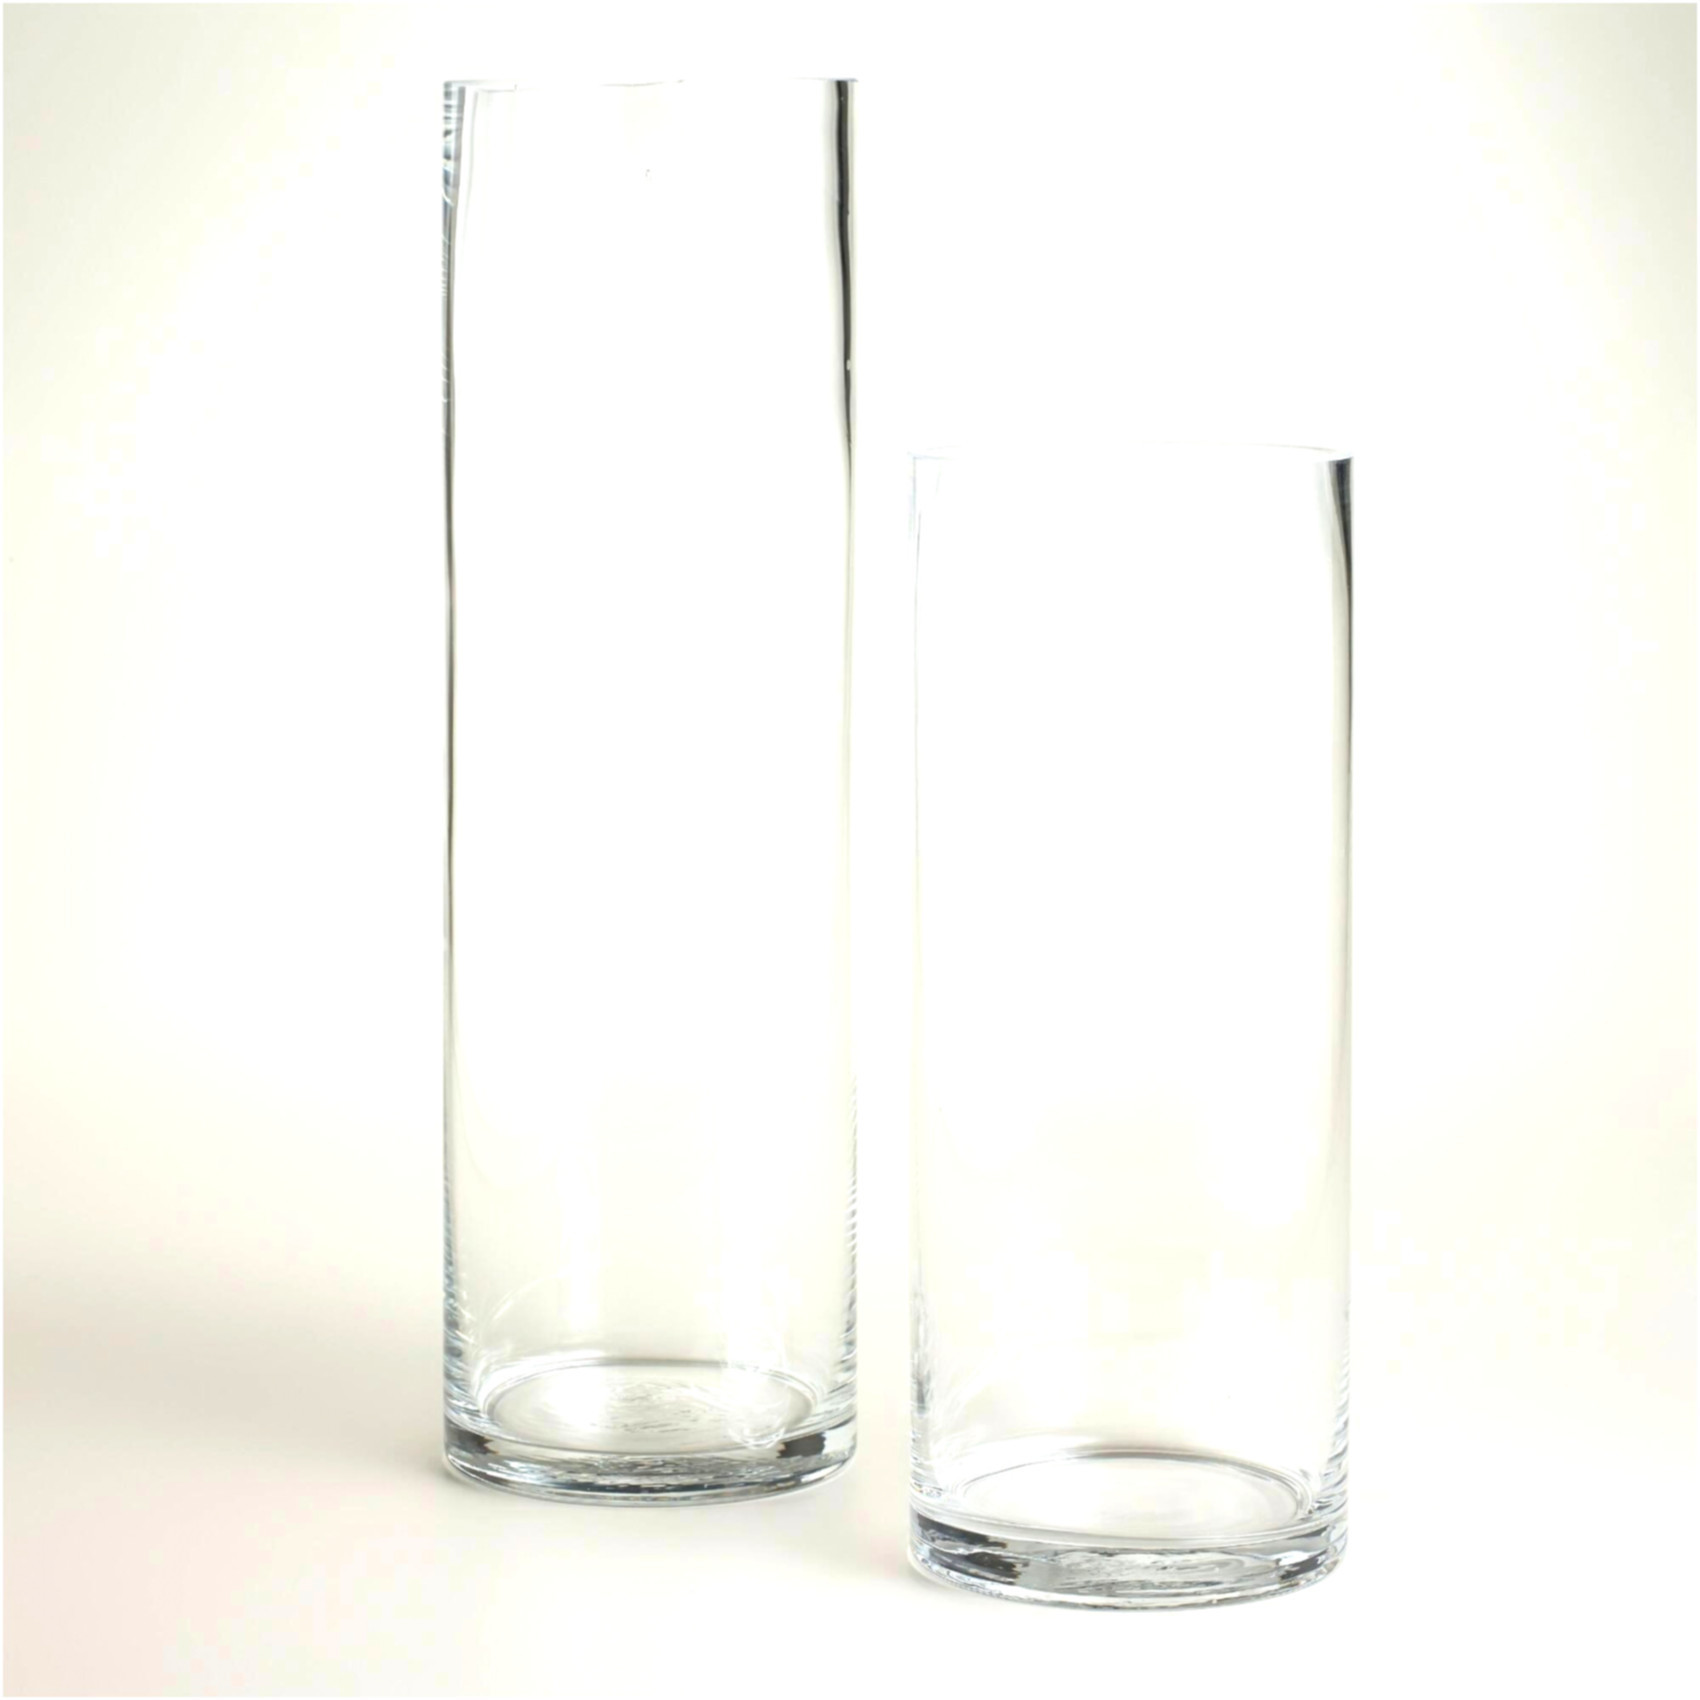 4x4 cylinder glass vase of why you should not go to glass vases wholesale glass vases pertaining to crystal glass vases wholesale inspirational 30 elegant vases with